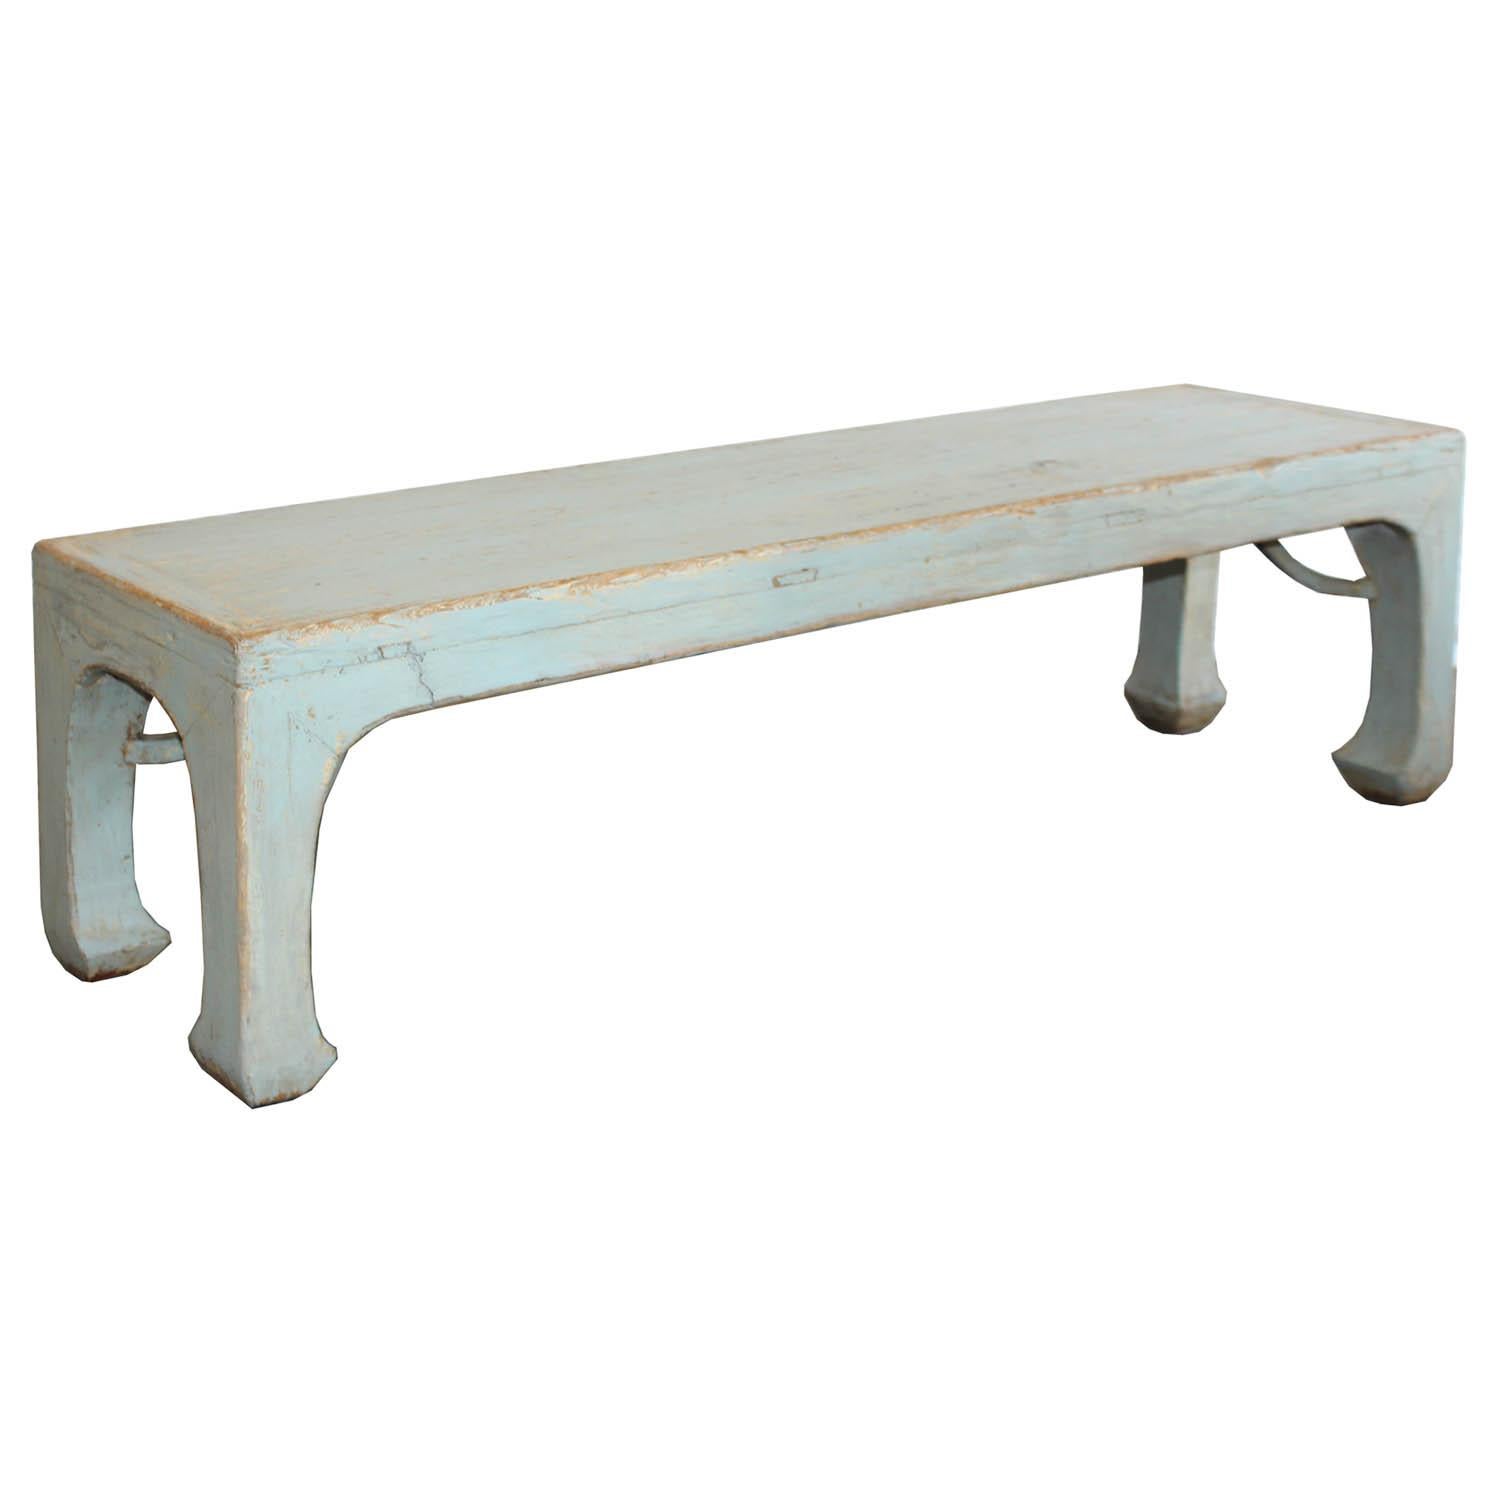 Long bench with matte blue finish. Curved arm braces below the top surface and horse hoof-style feet. Perfect at the end of the bed or use as extra seating in a contemporary interior.


